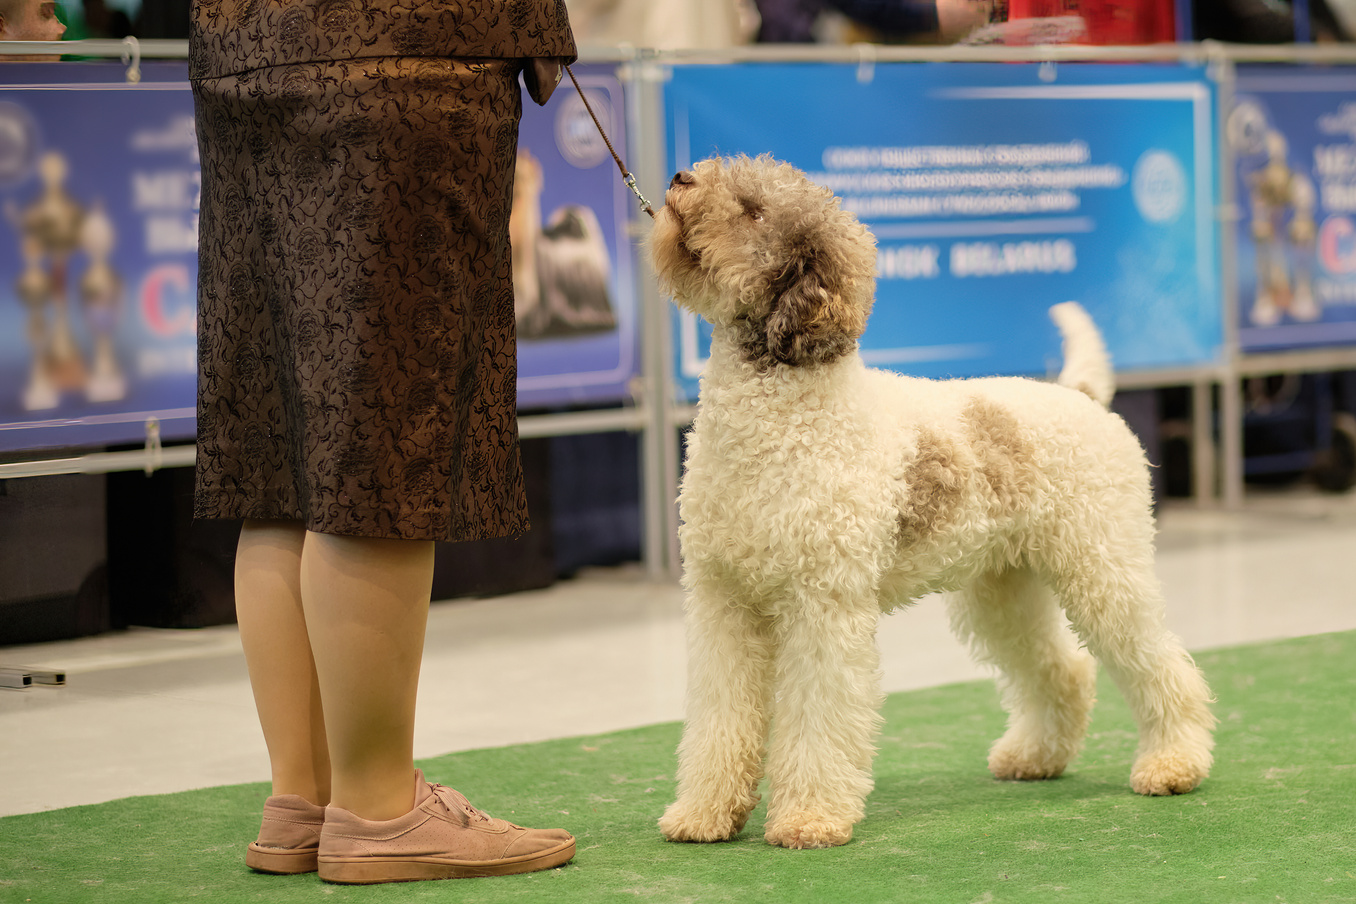 Lagotto Romagnolo's dog in the dog show stand